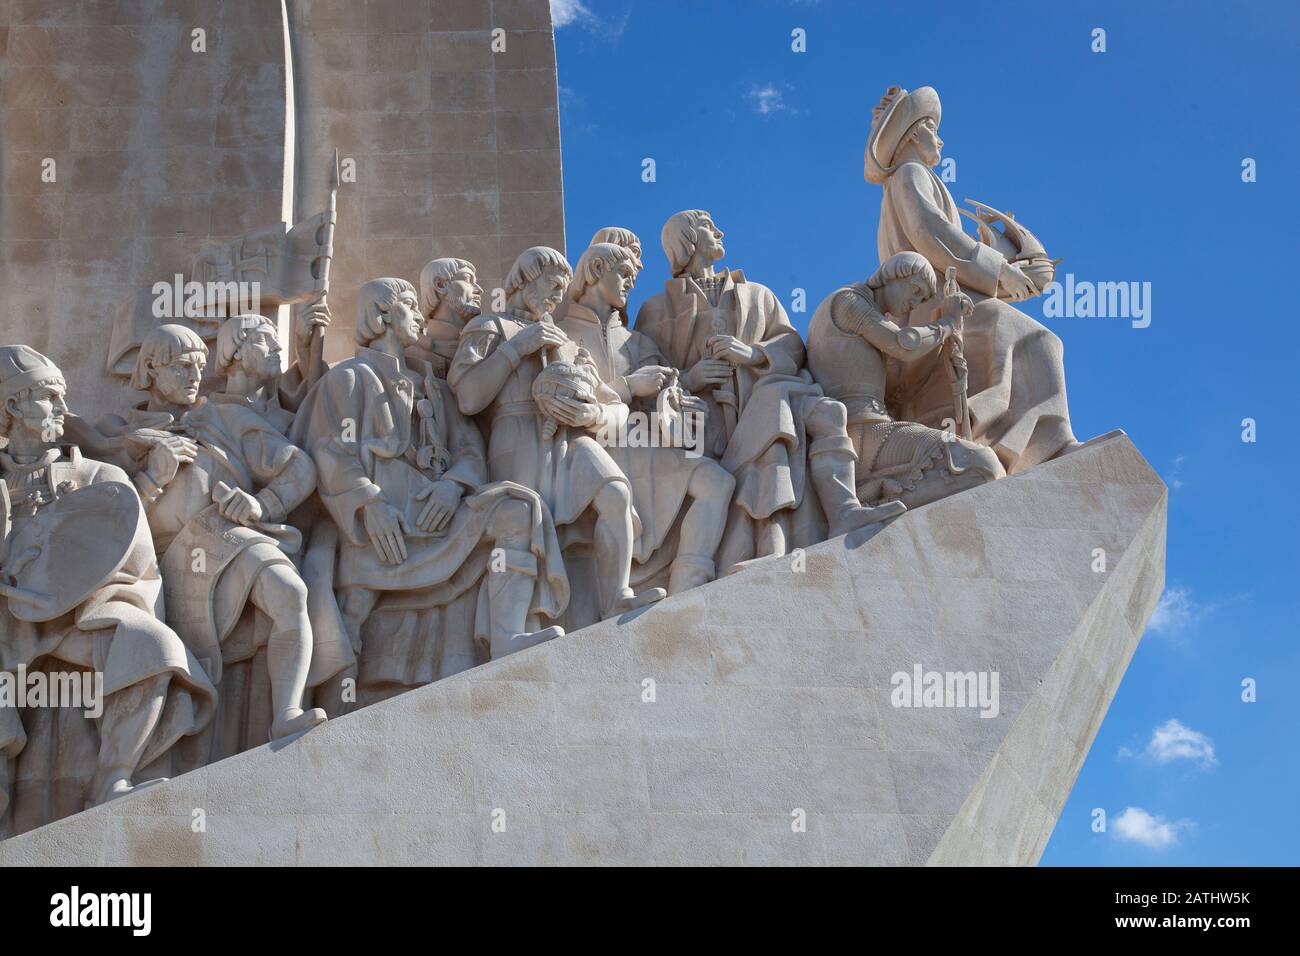 Western profile of the Padrao dos Descobrimentos, or Monument of the Discoveries, in Belem, Lisbon, Portugal Stock Photo